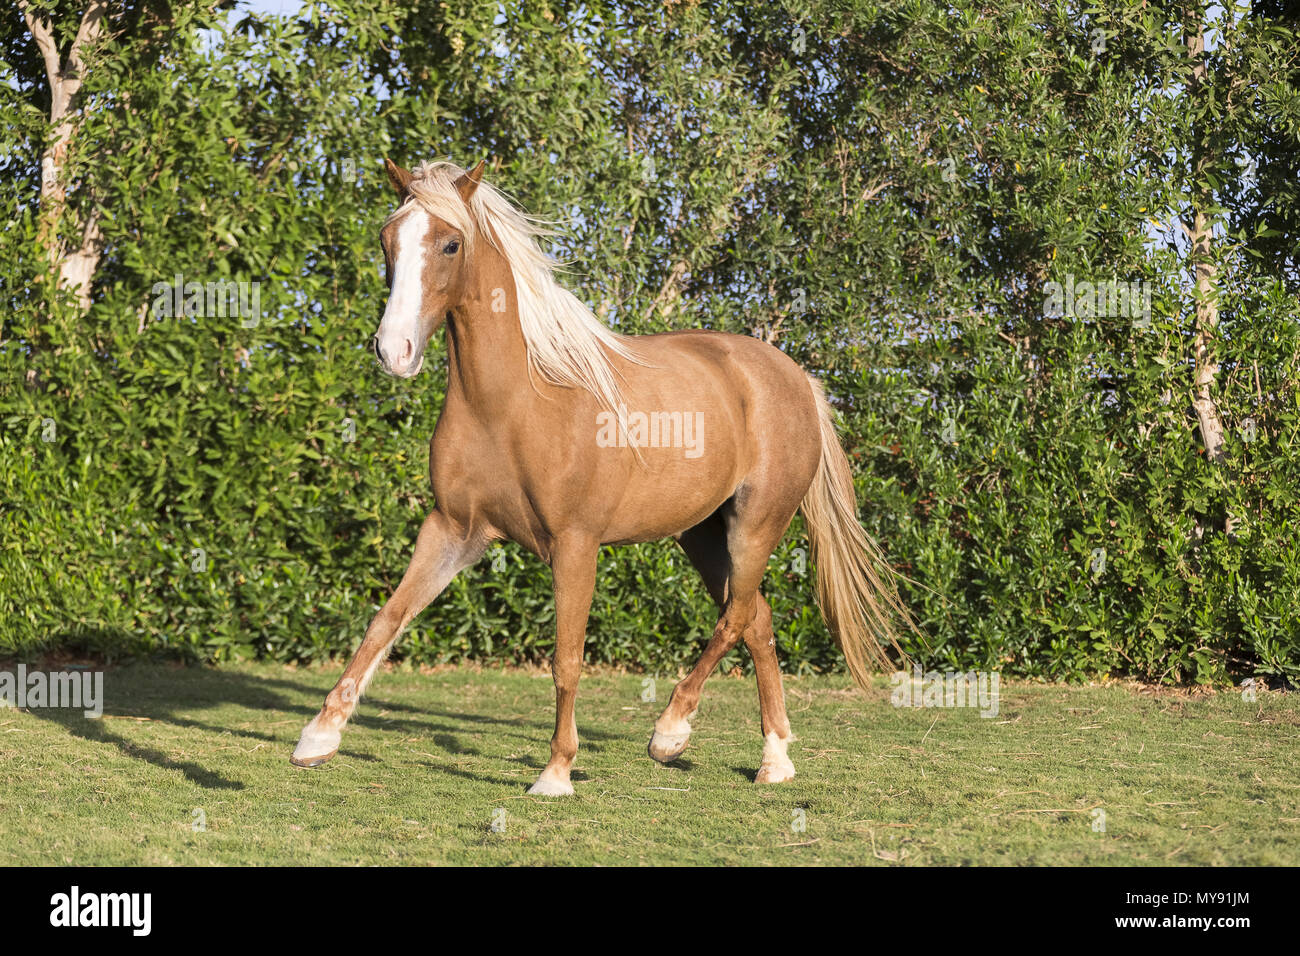 Welsh Pony. Chestnut mare trotting on a lawn. Egypt Stock Photo